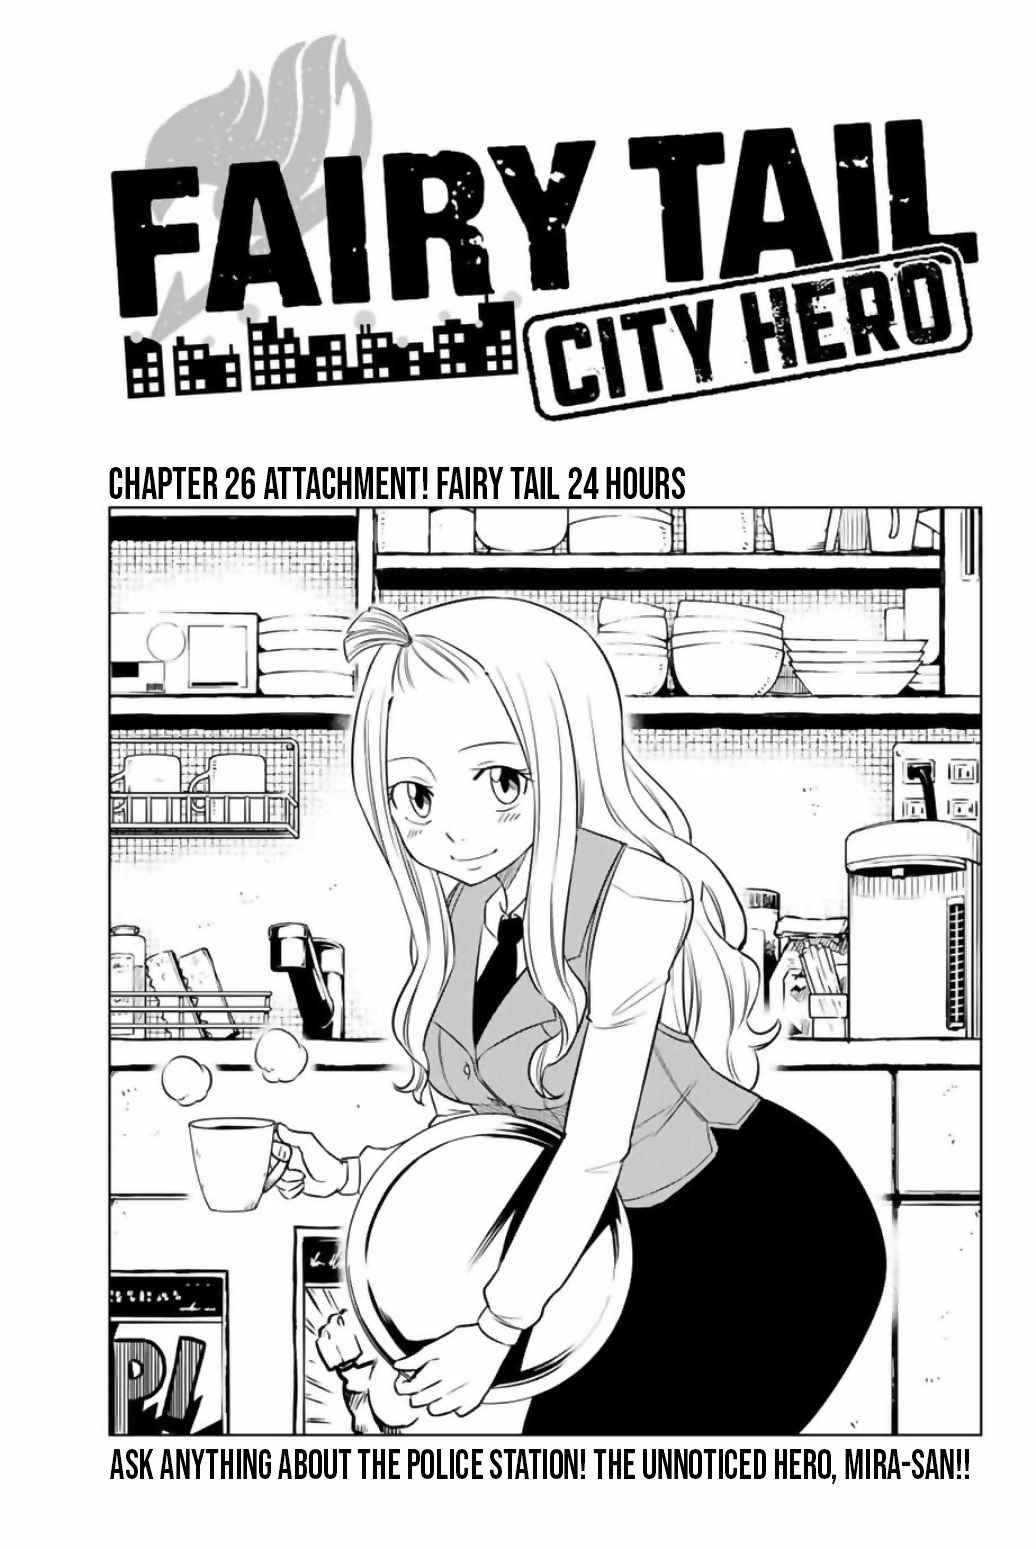 Fairy Tail: City Hero Ch. 26 Attachment! Fairy Tail 24 Hours 1